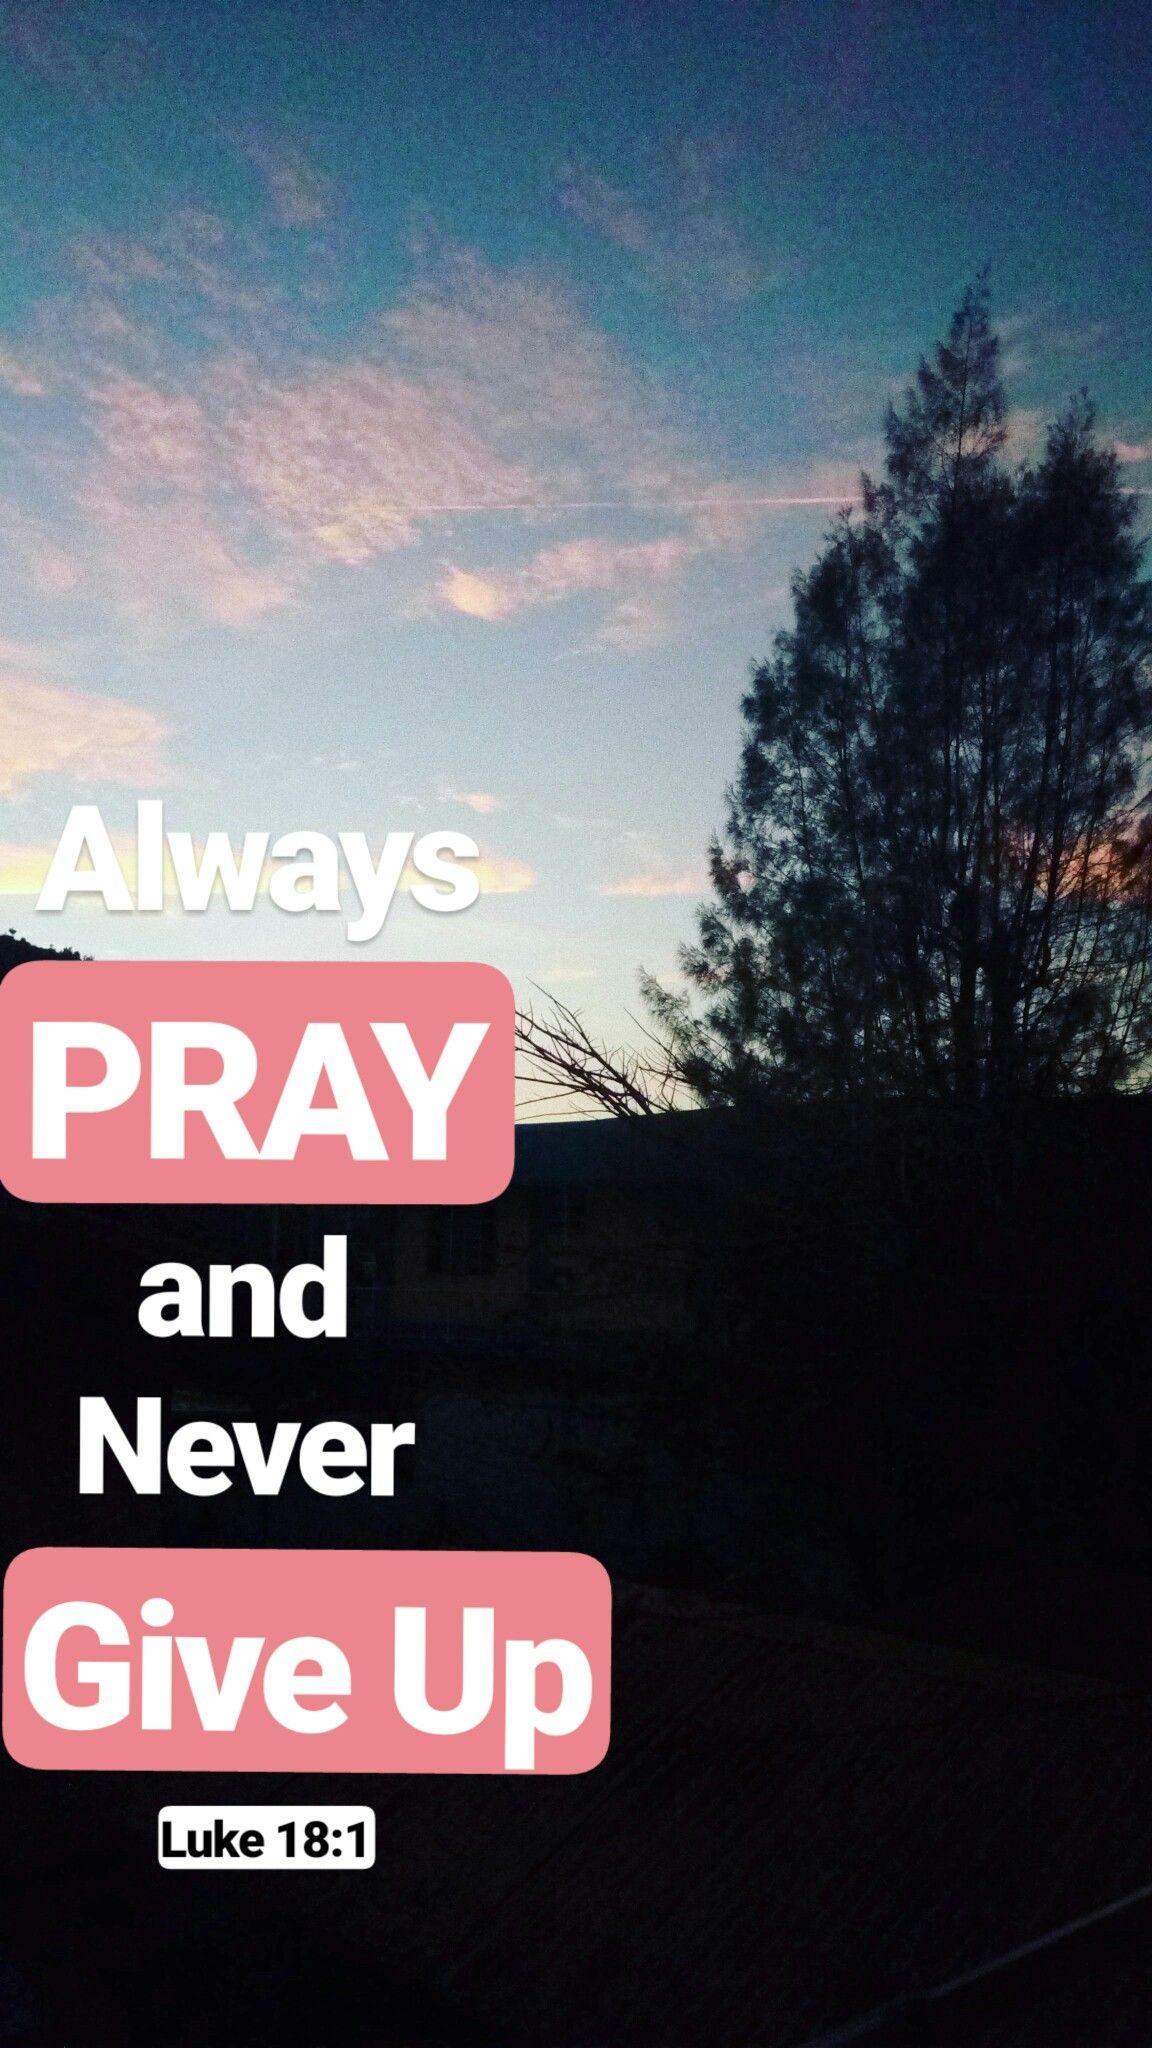 always pray and never give up! Luke 18:1 #bible #verse